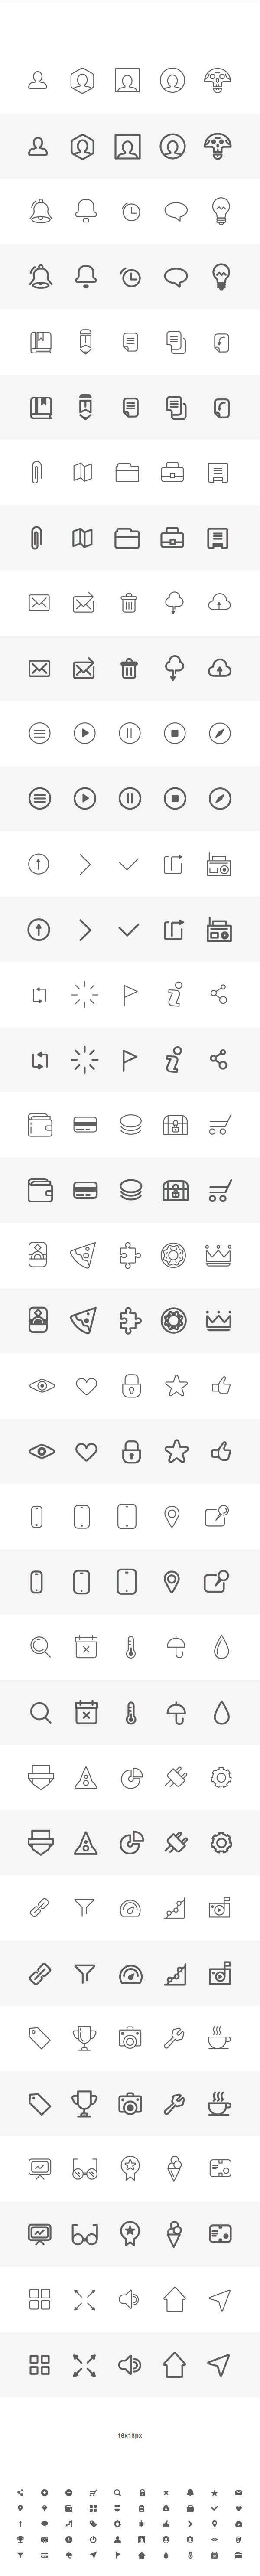 Wireframe-Icons600